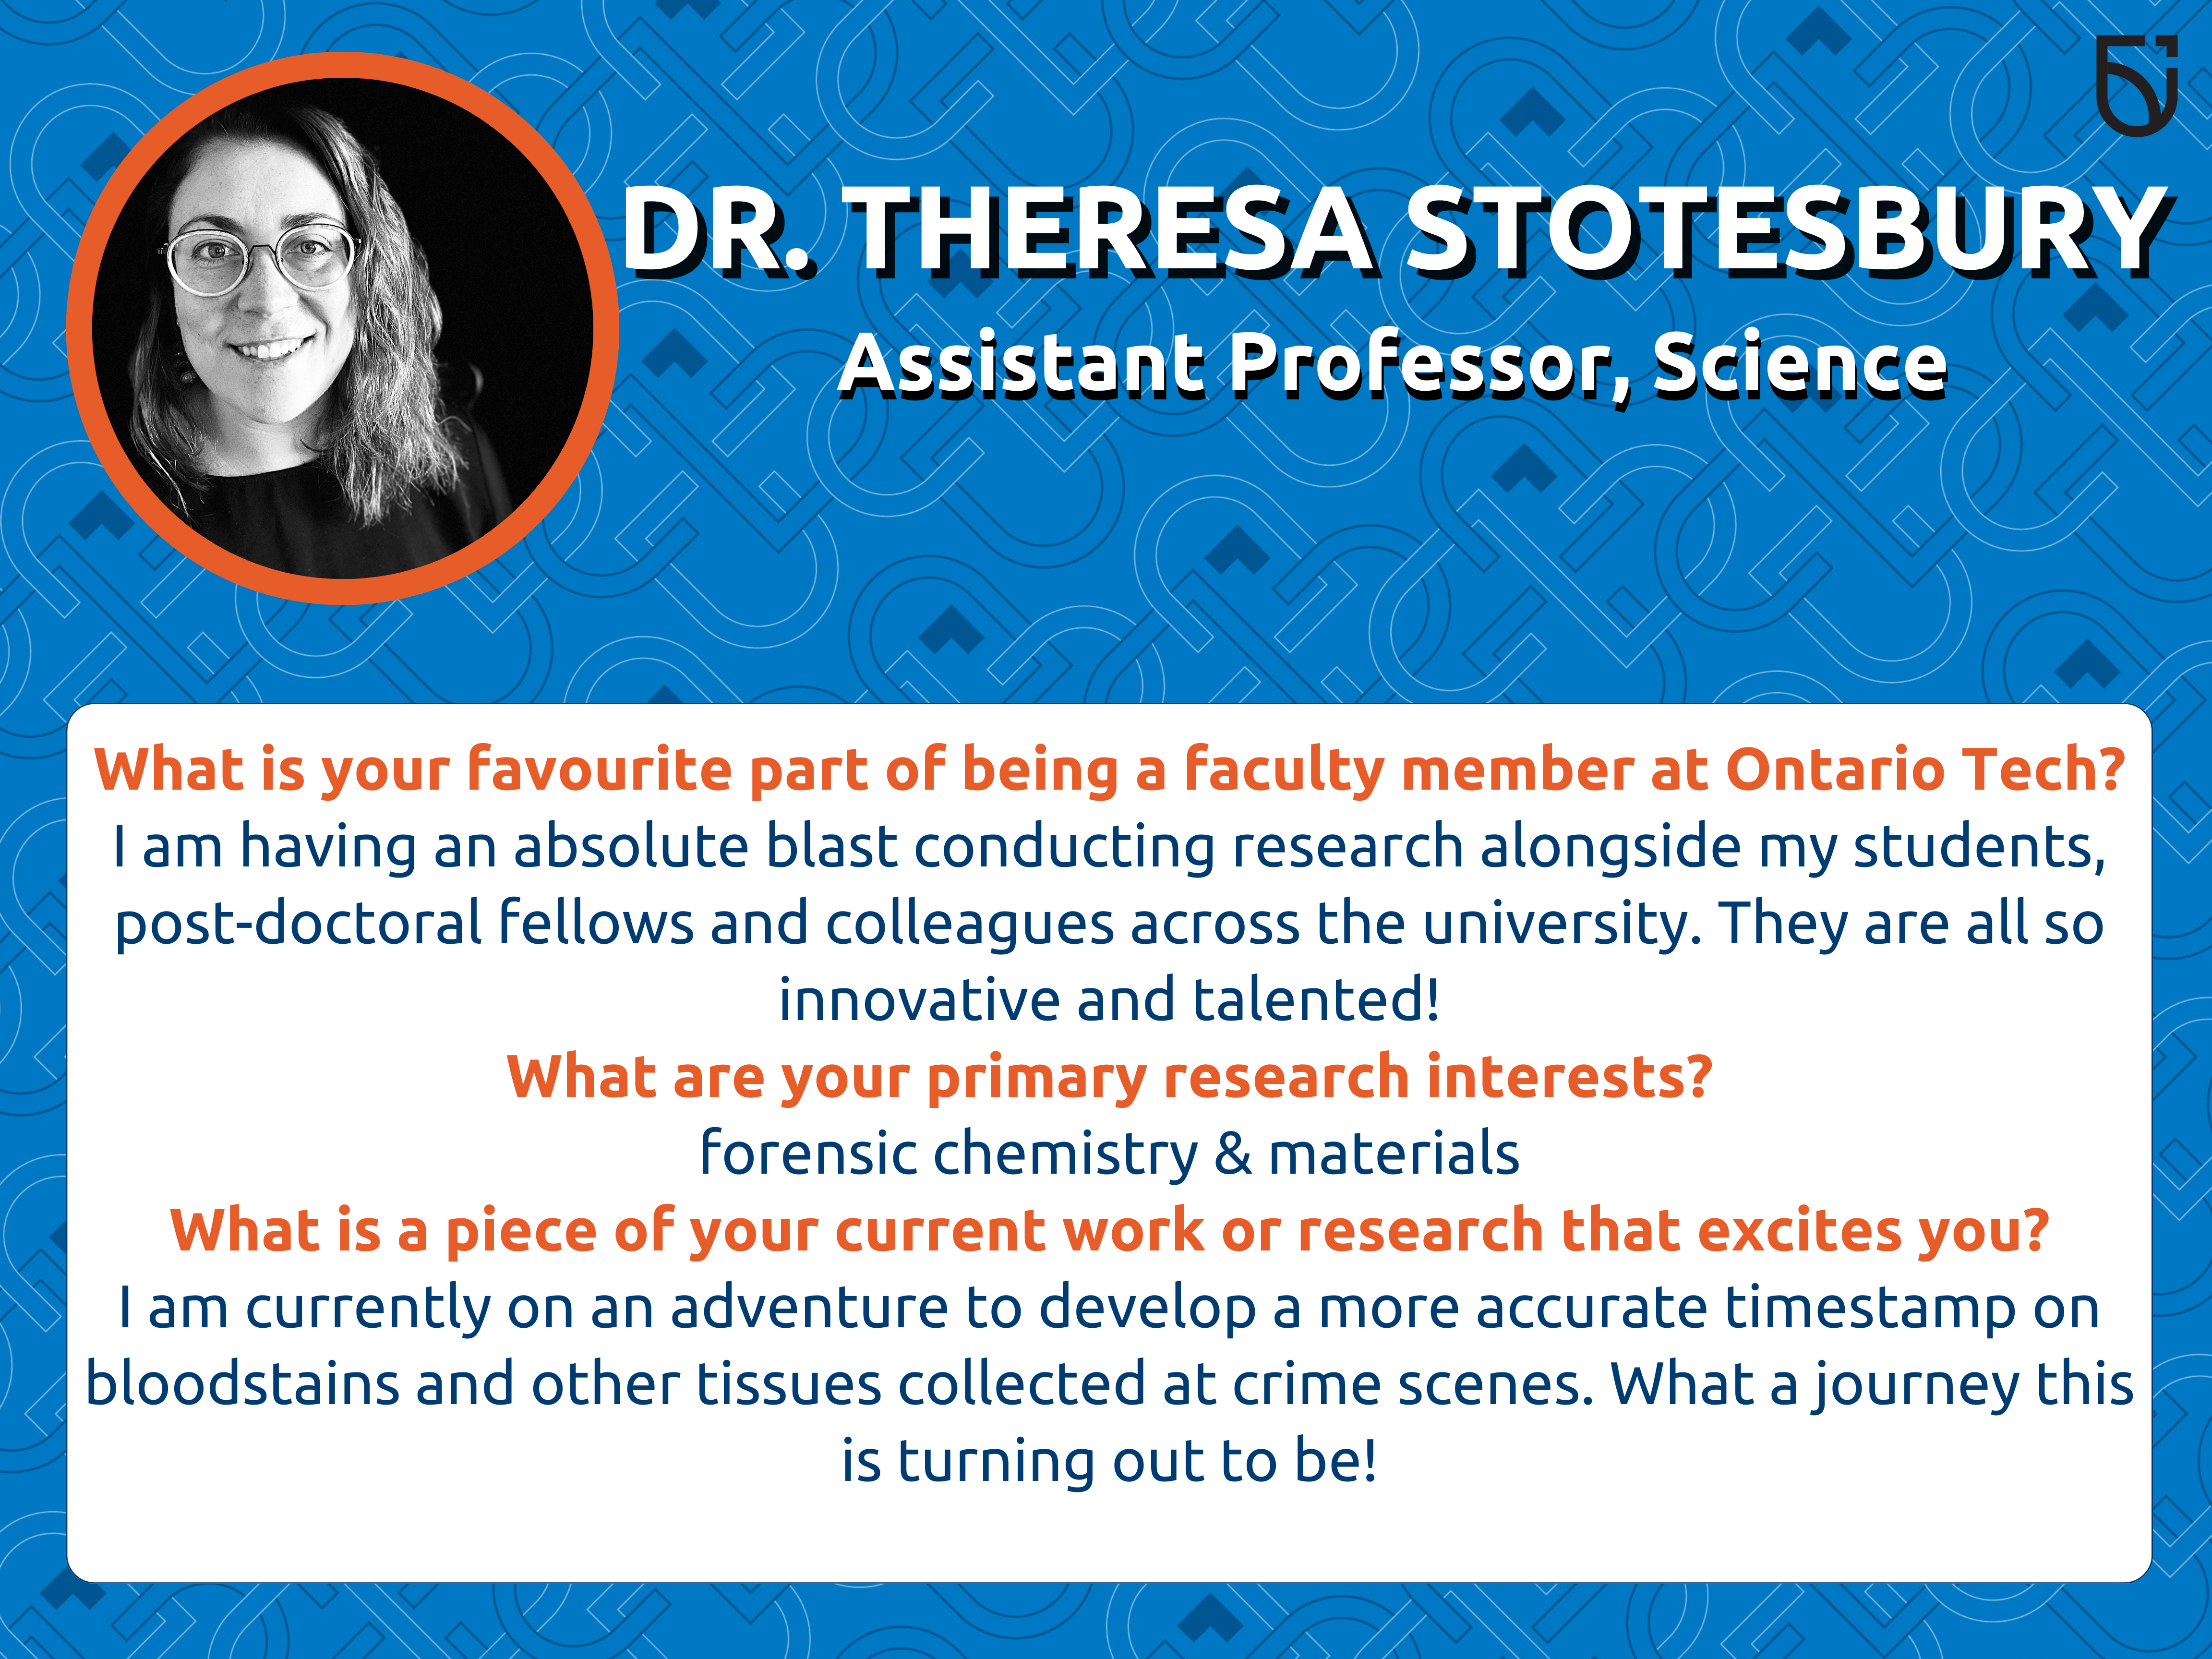 This photo is a Women’s Wednesday feature of Dr. Theresa Stotesbury, an Assistant Professor in the Faculty of Science.